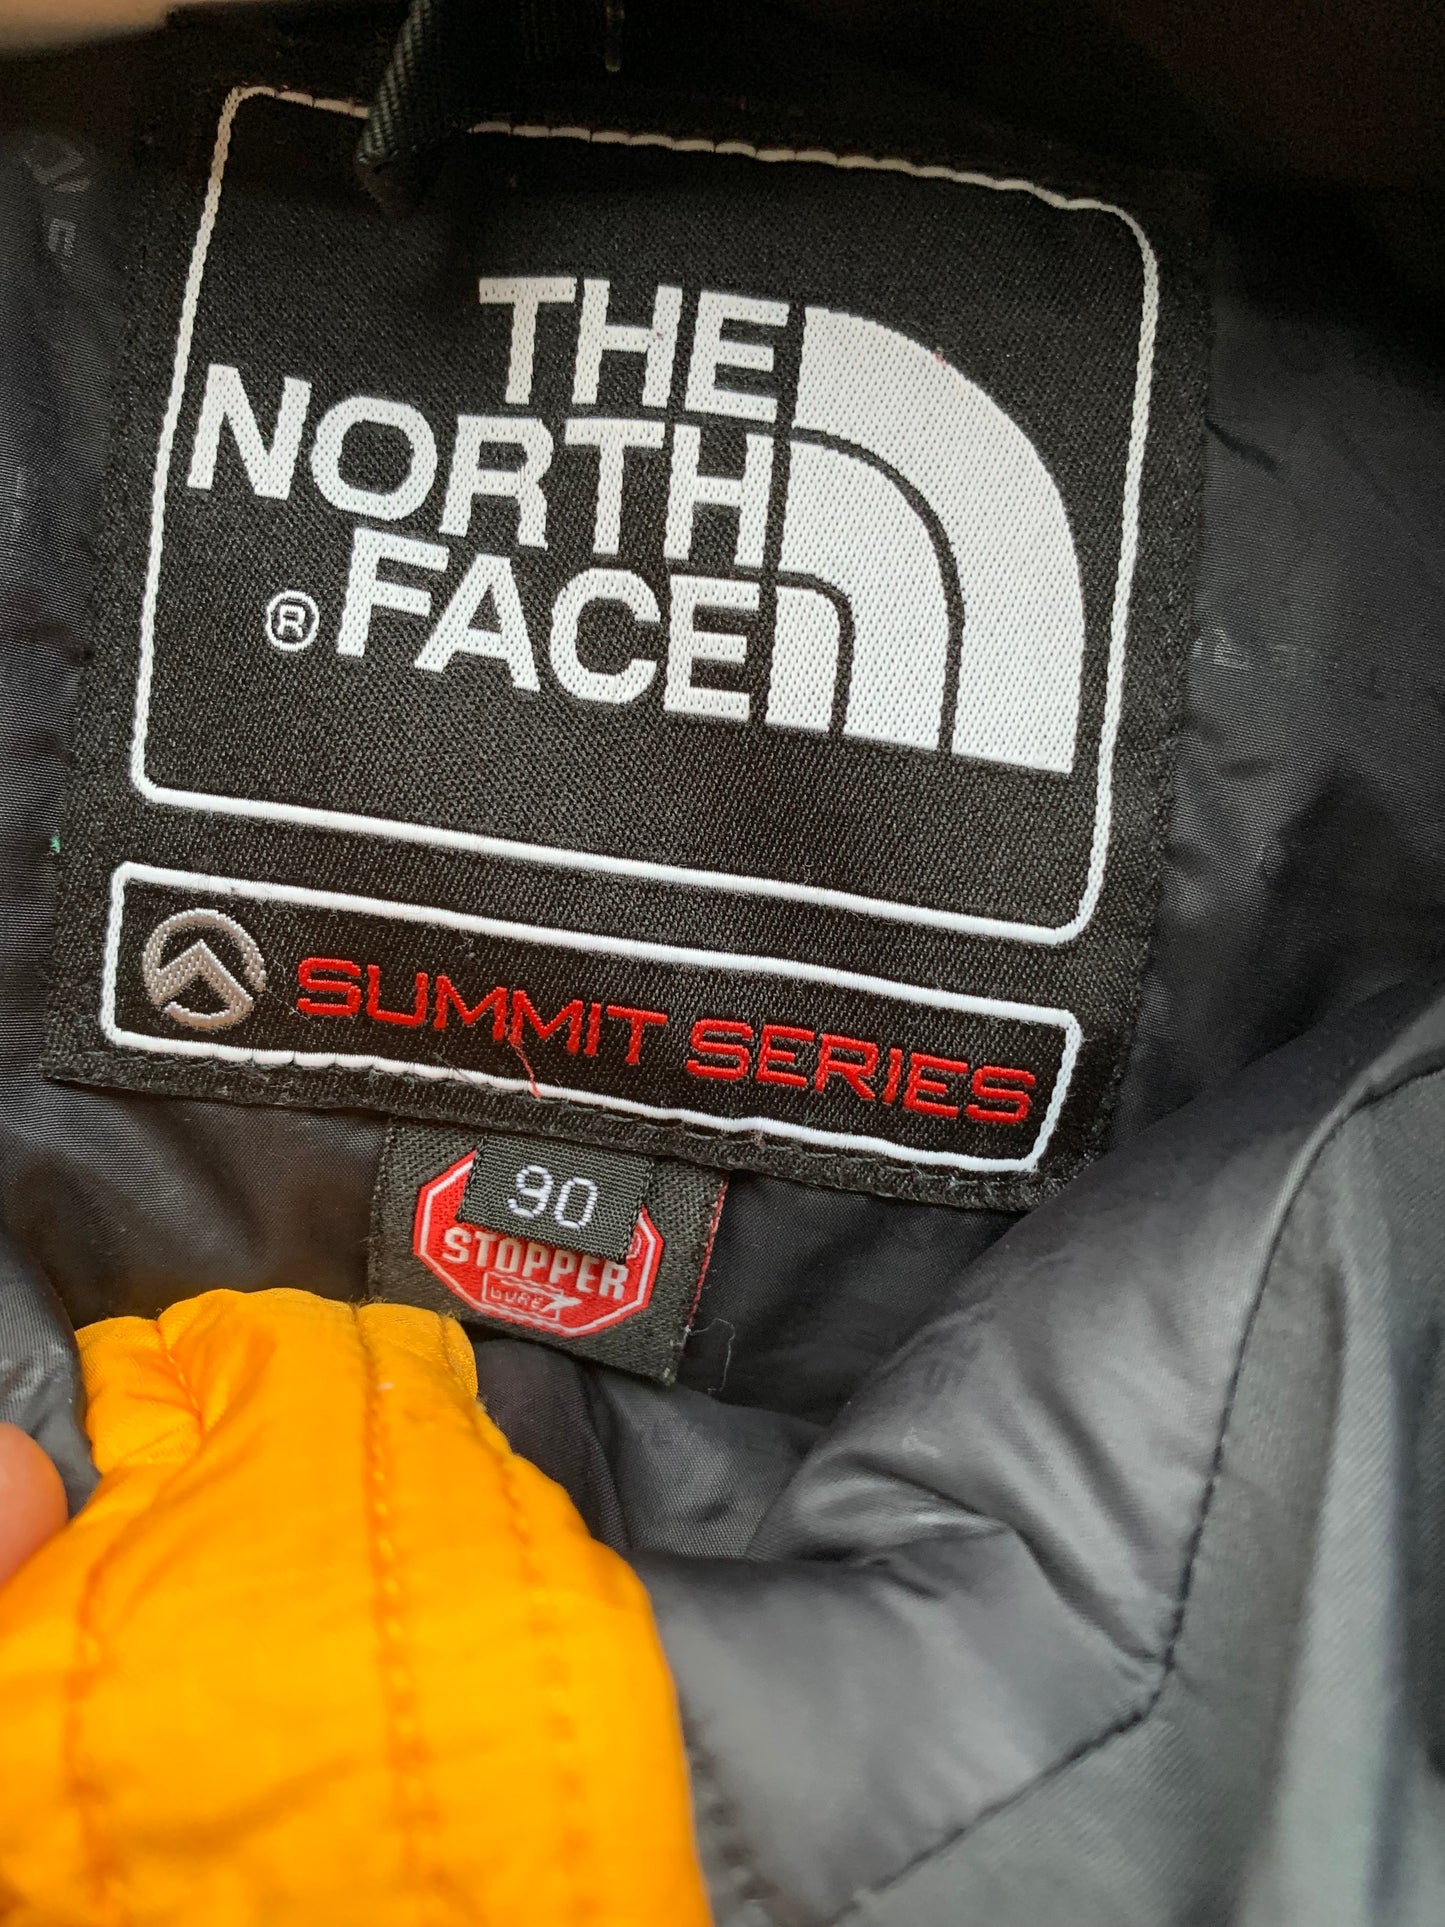 (S) The North Face 700 Summit Series